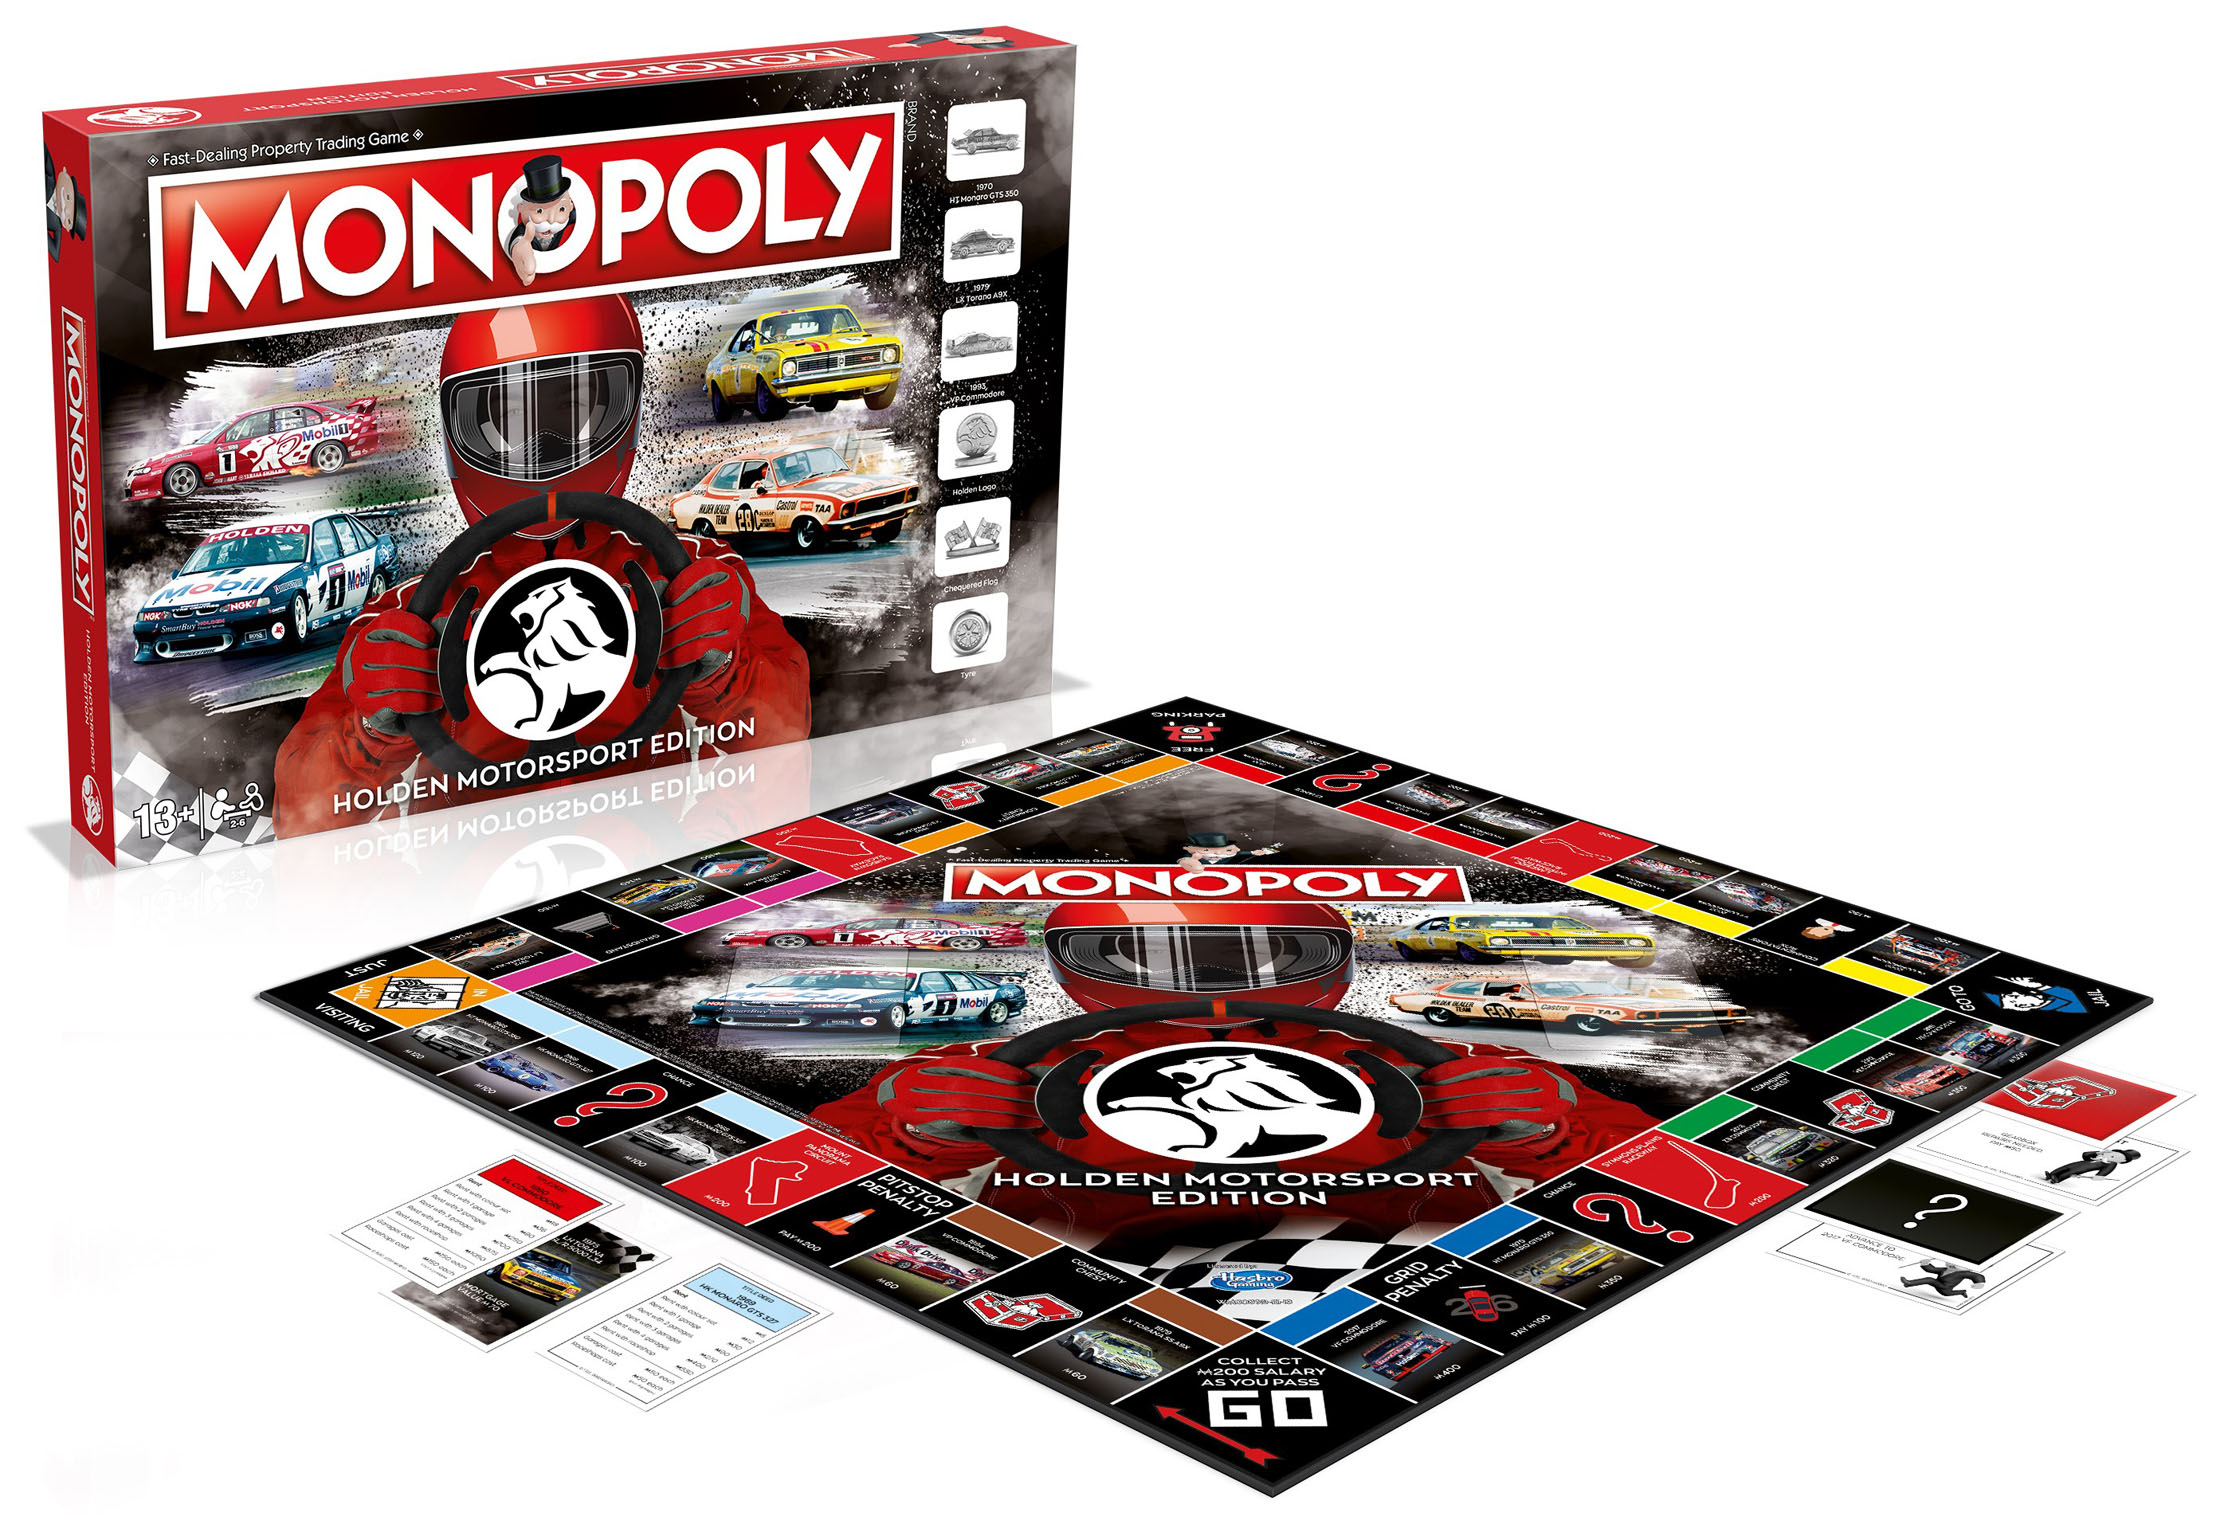 Holden Monopoly Board Game Goes On Sale - BodyShop News